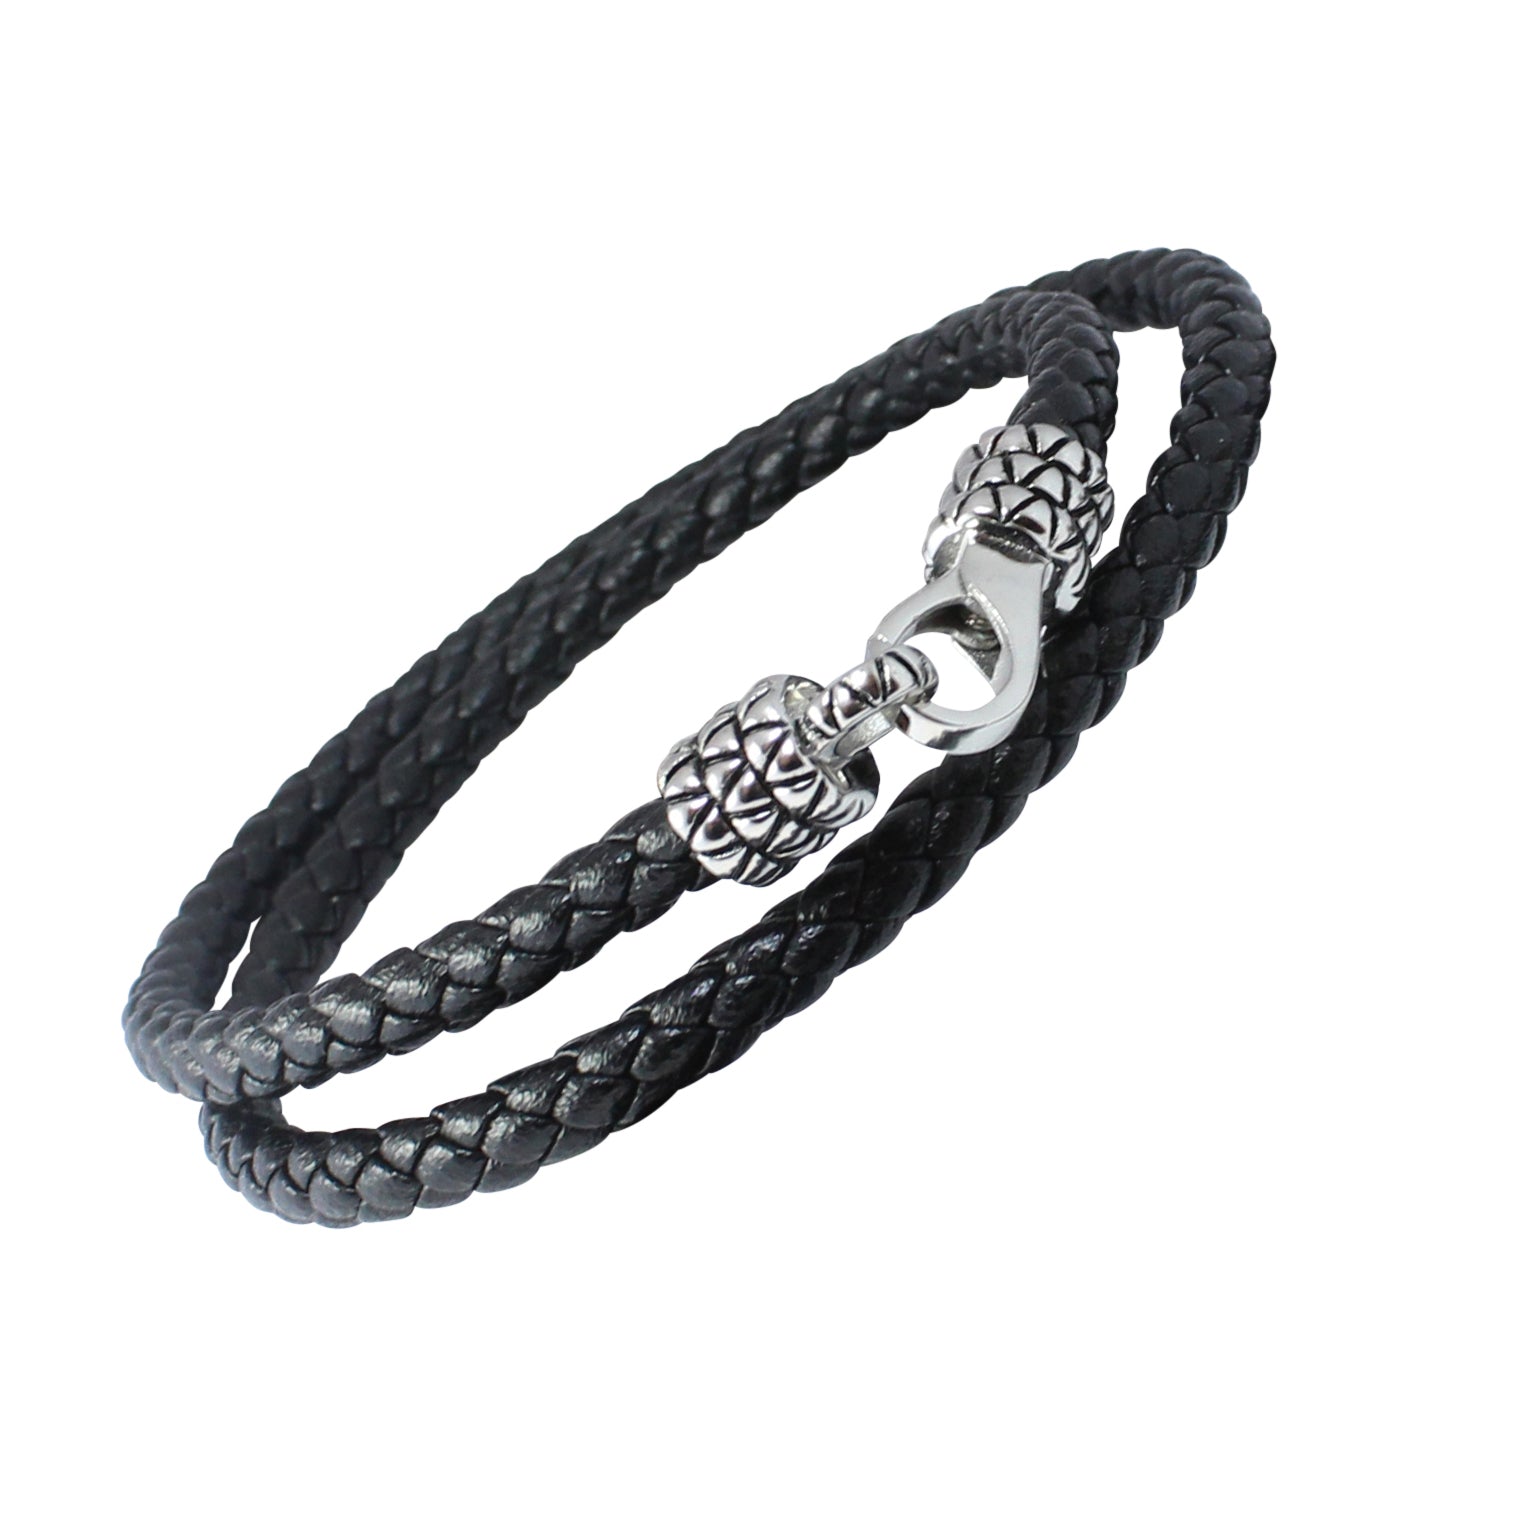 DRAGON SKIN - Braided Black Wrap Bracelet in Leather with Stainless Steel. 17